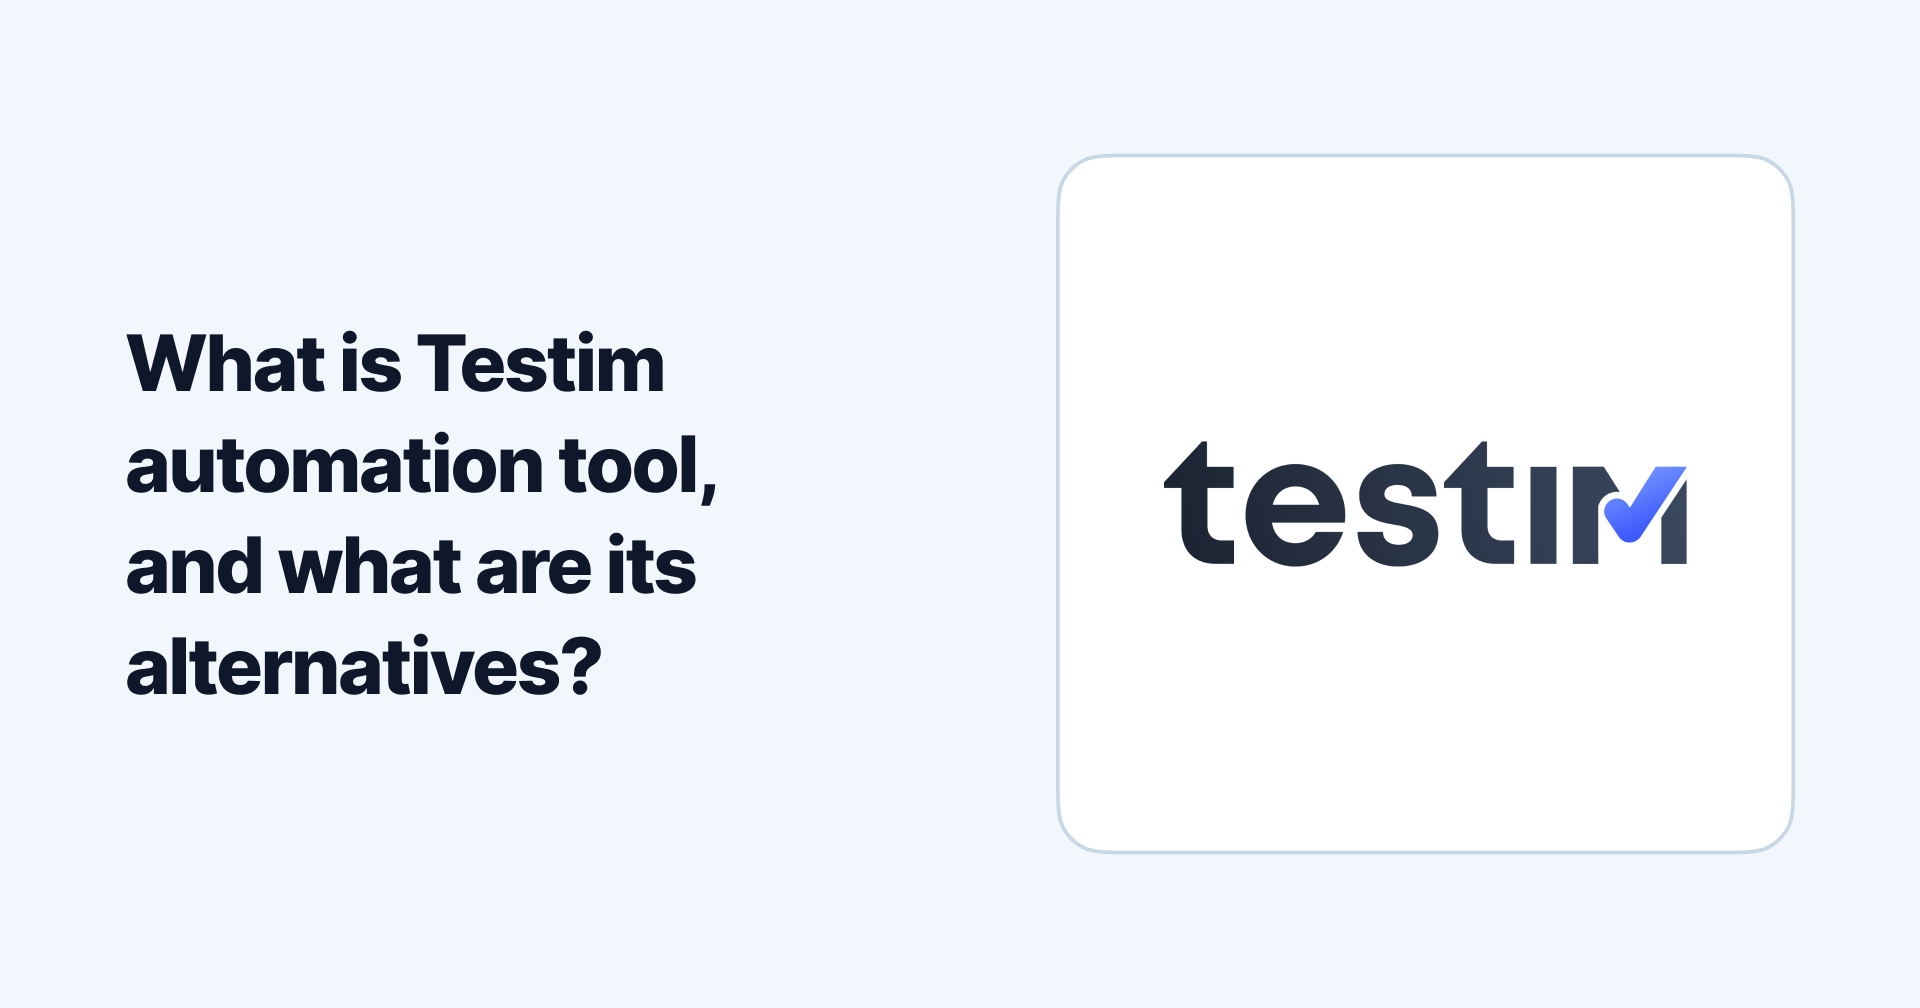 What is Testim automation tool, and what are its alternatives?